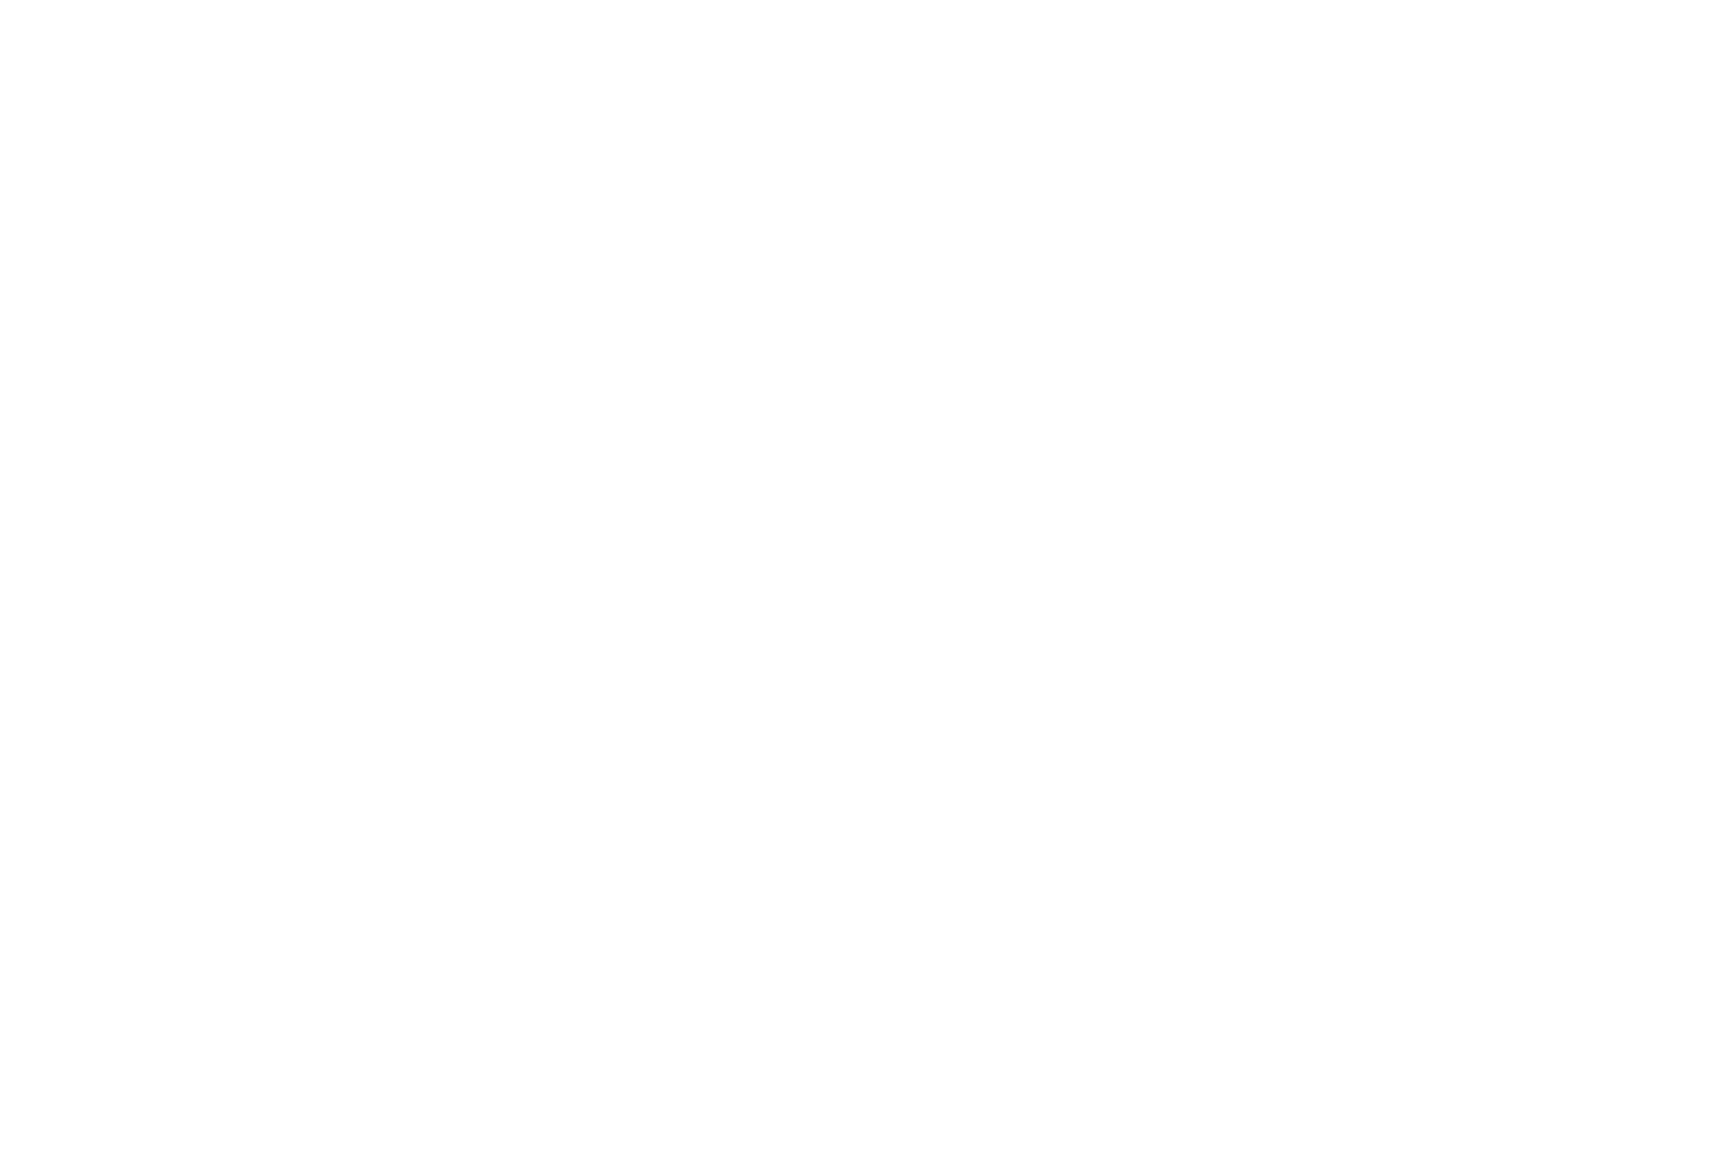 OFFICIAL SELECTION - AMARCORD CHICAGO ARTHOUSE TELEVISION  VIDEO AWARDS - 2016.png